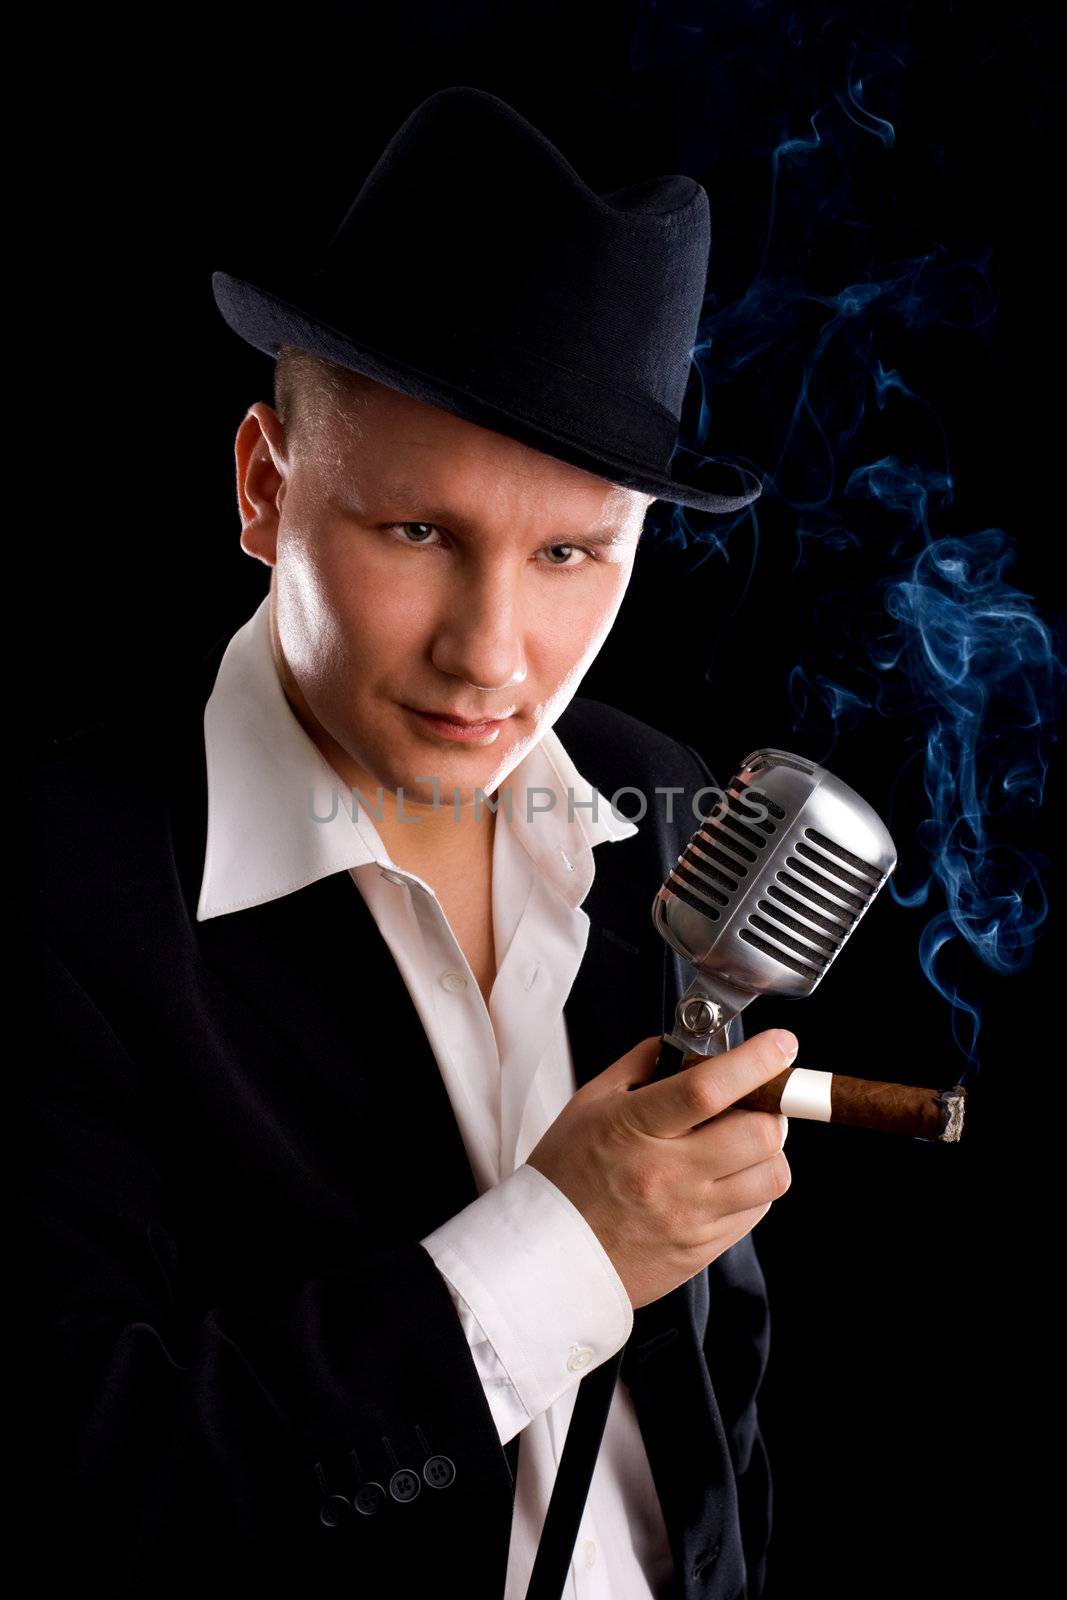 Jazzman and retro microphone in suit and hat